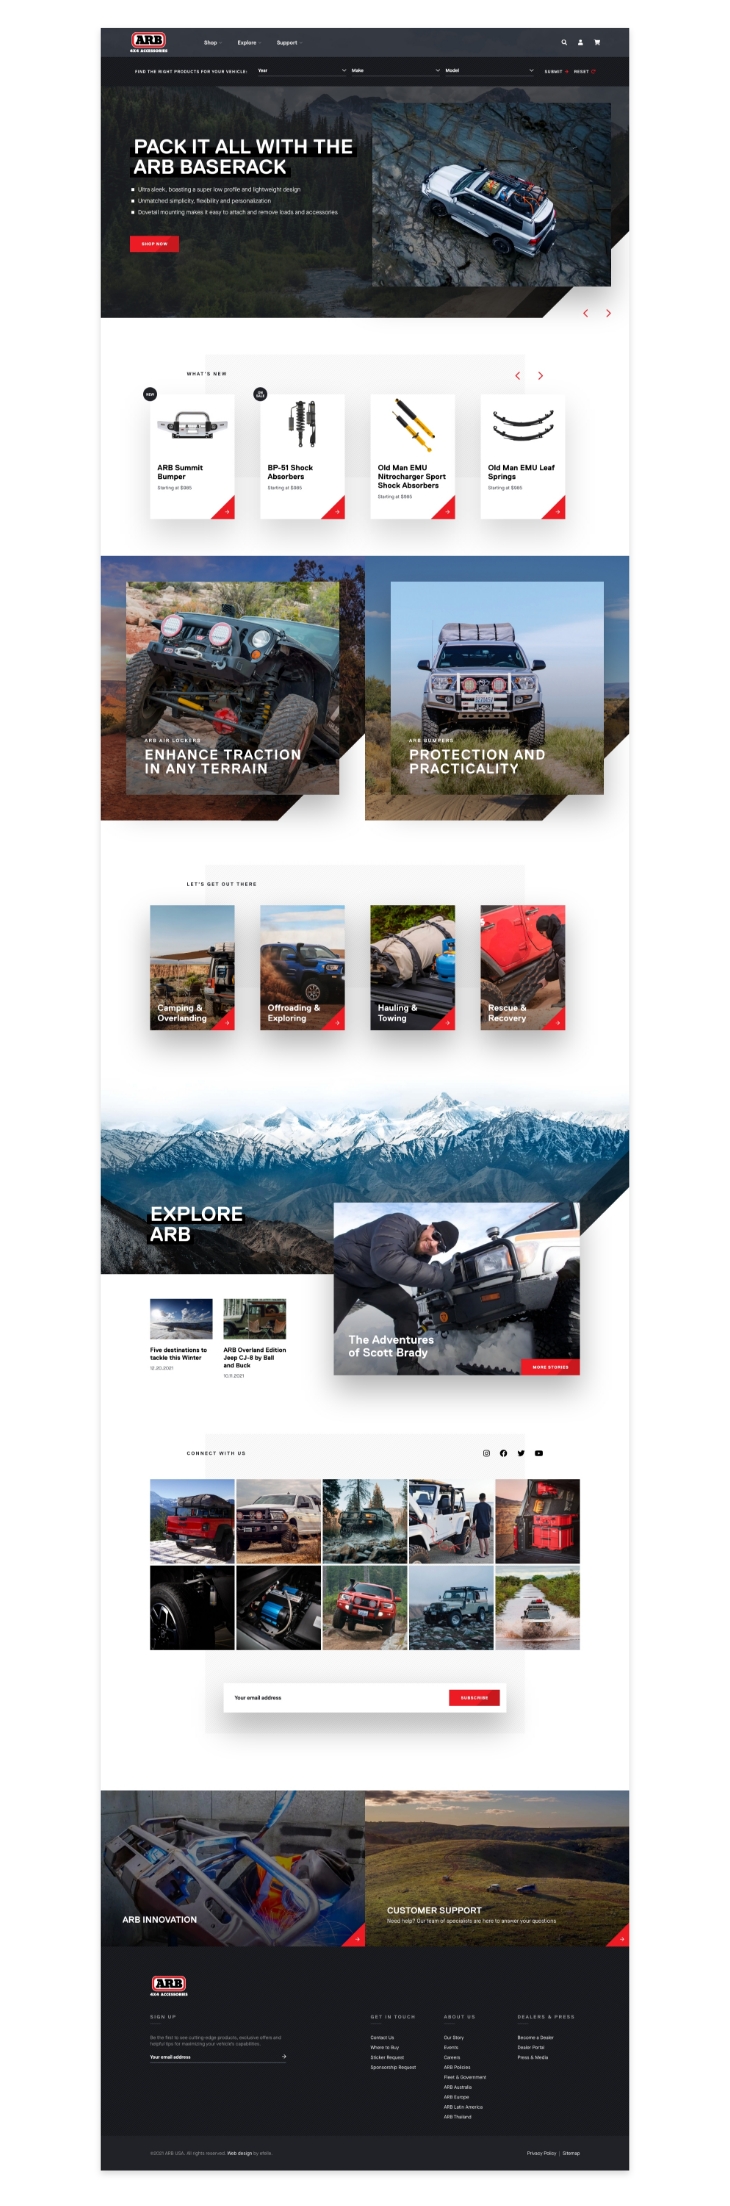 ecommerce_website_-redesign_-for_4wd_-accessories_manufacturer-and_distributor_-in_auburn_wa_blog-asset.jpg